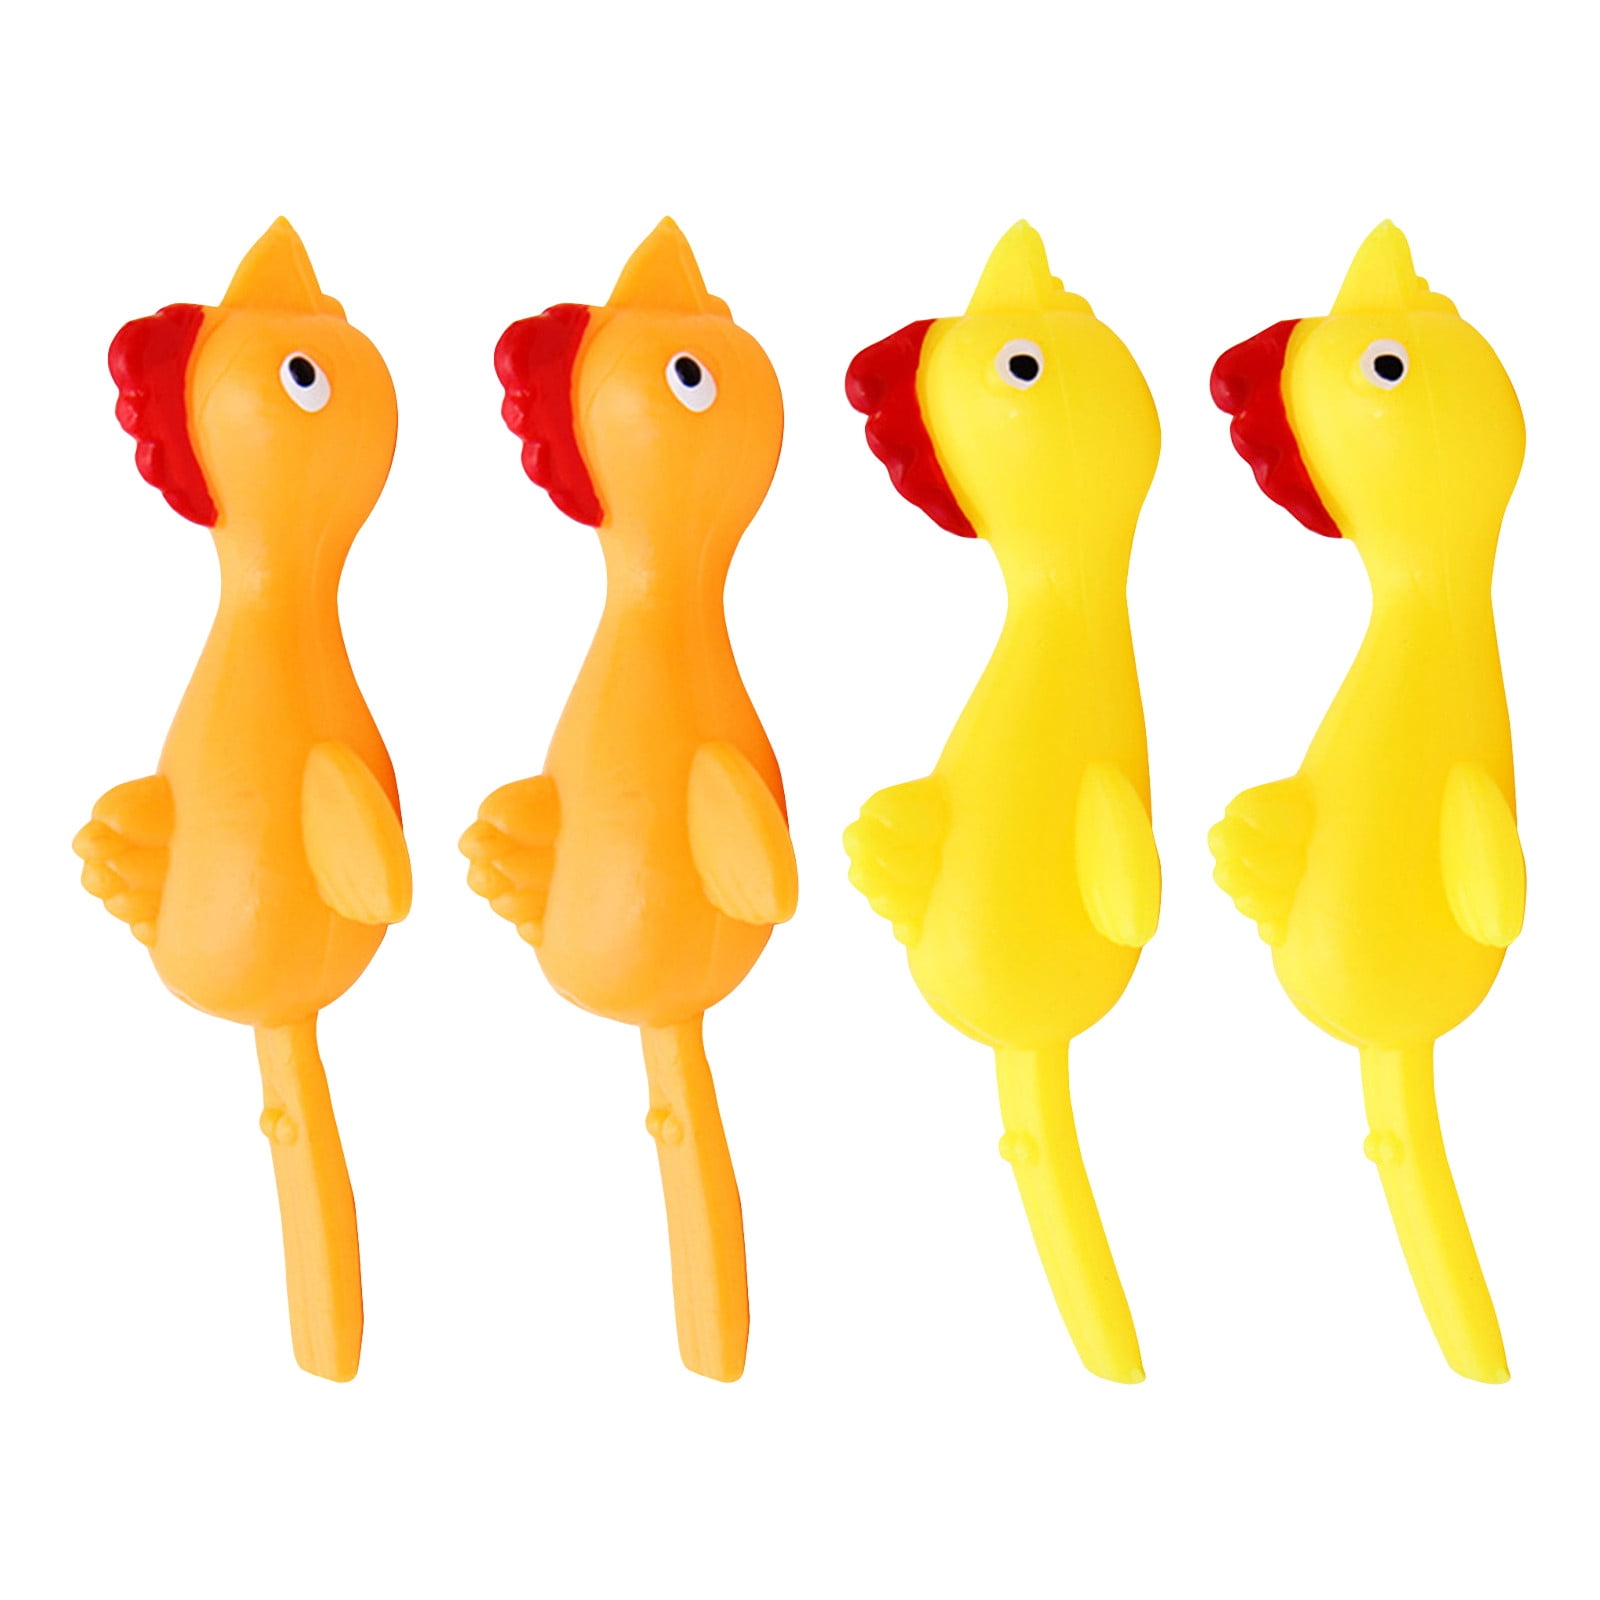 4PCS=2Orange+2Yellow Ejection Chicken Toy Light Rubber Stretch Slingshot Finger Flying Toy Creative Prank Game to Relieve Stress for Children Adults Men Women 